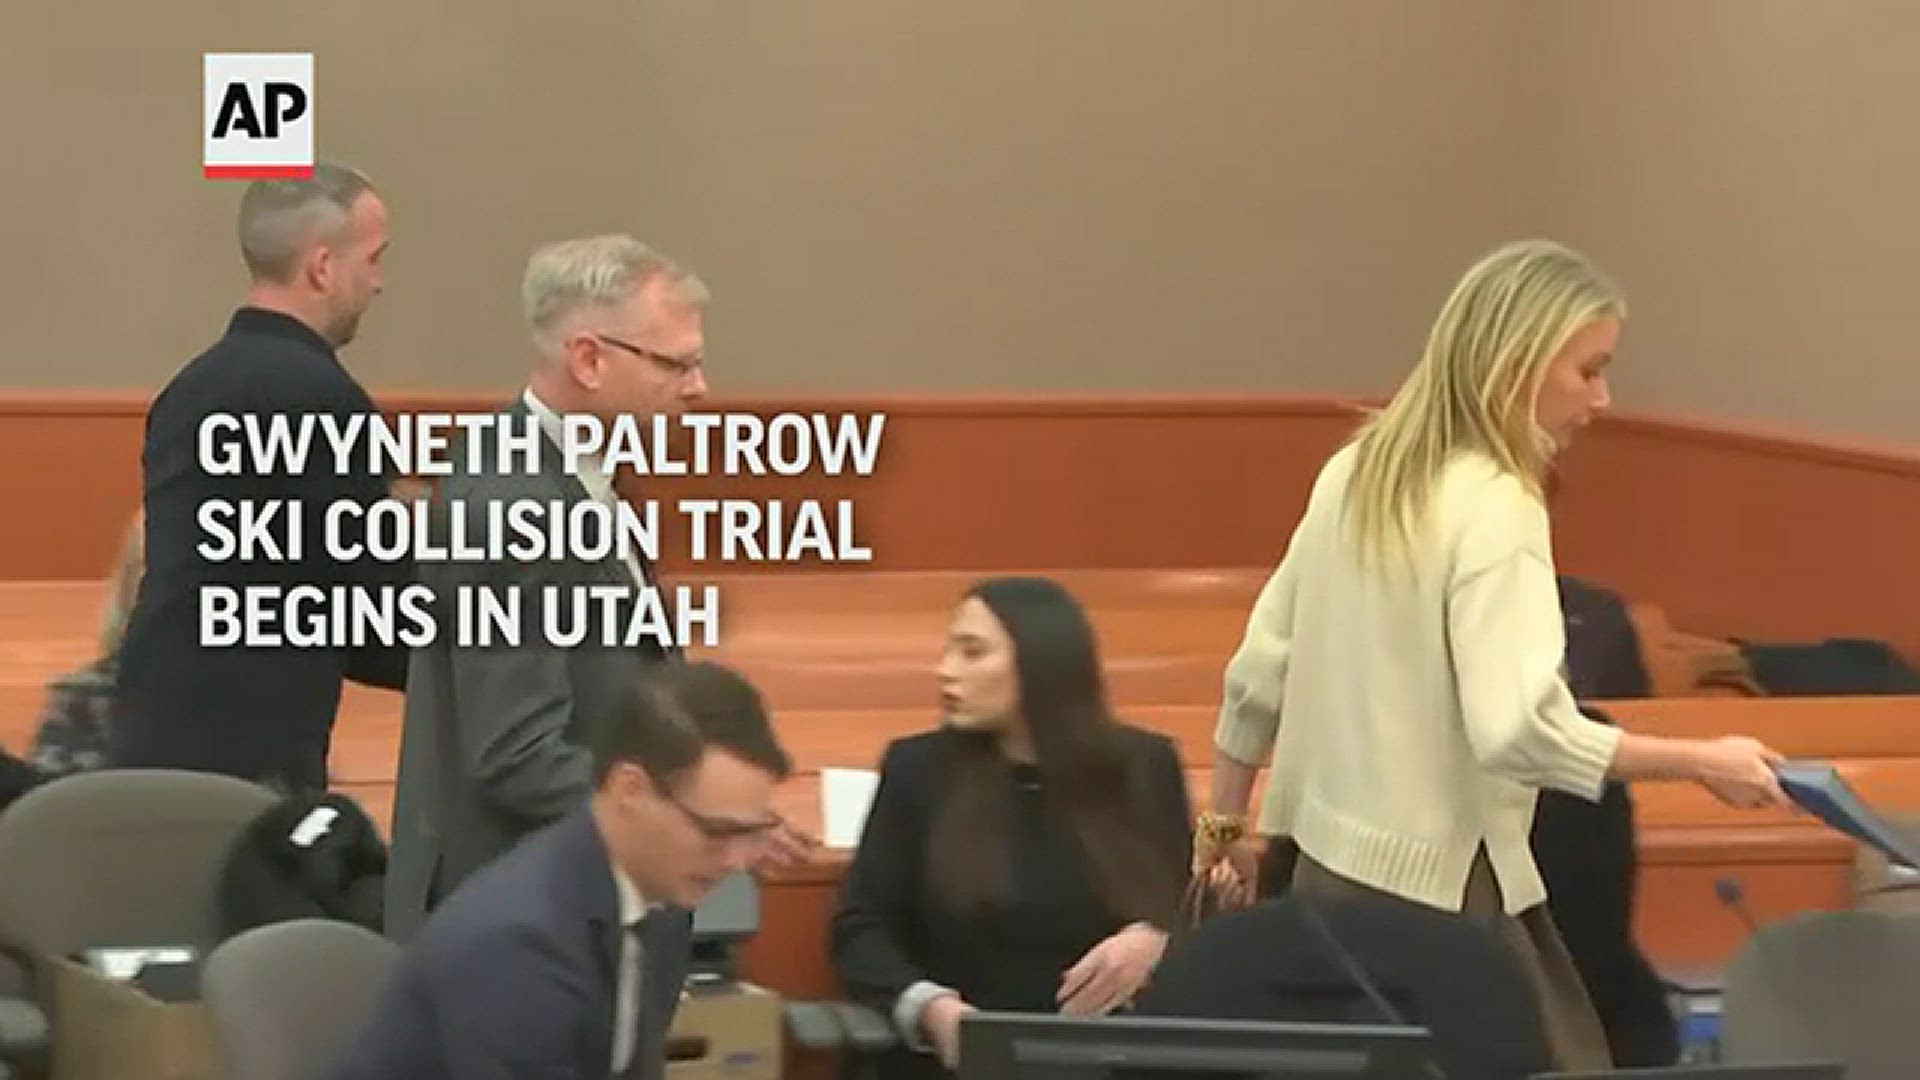 A skier claims Paltrow violently crashed into him, leaving him with broken ribs and a brain injury — but Paltrow's countersuit tells a different story.